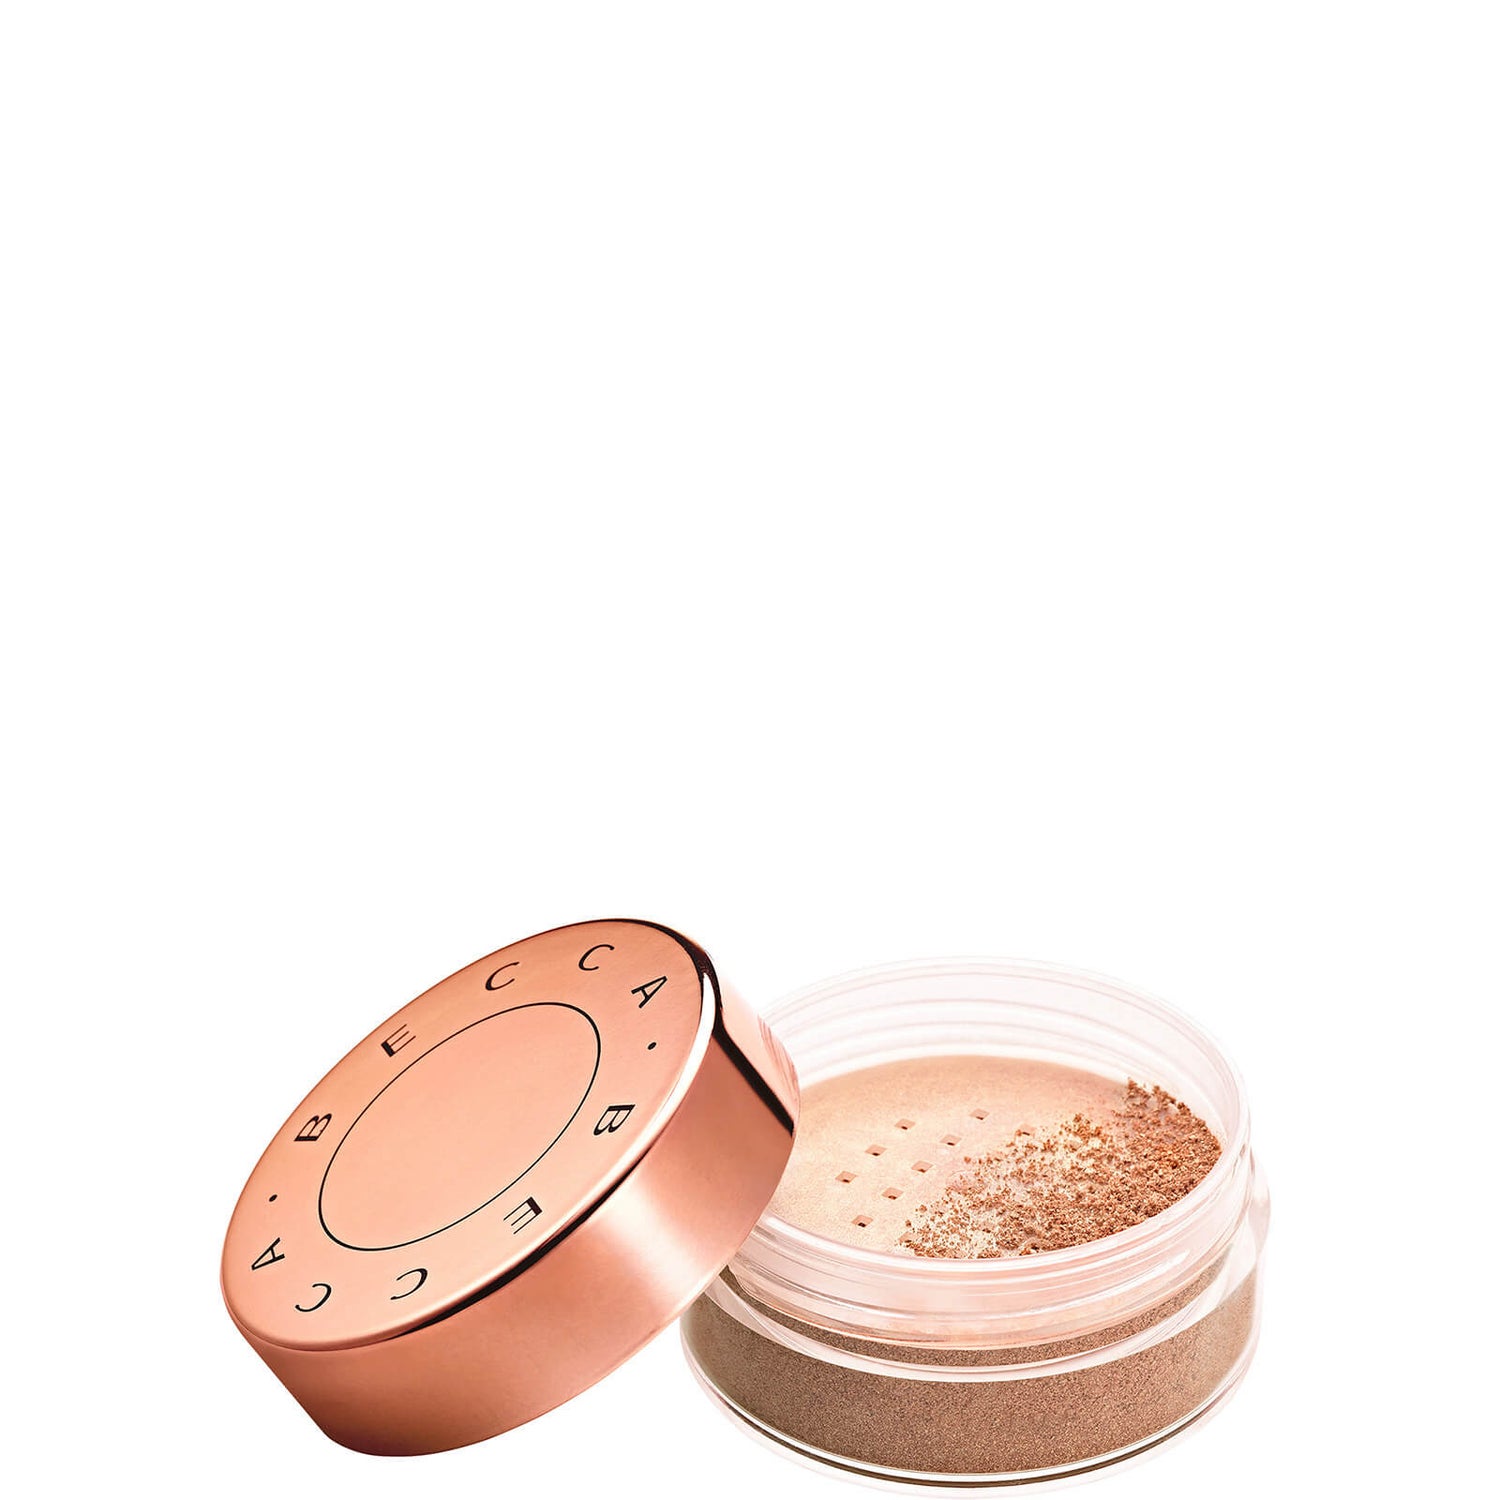 Svaghed Opiate Fantasifulde BECCA Collector's Edition Glow Dust Highlighter - Champagne Pop (0.53 oz.)  - Dermstore